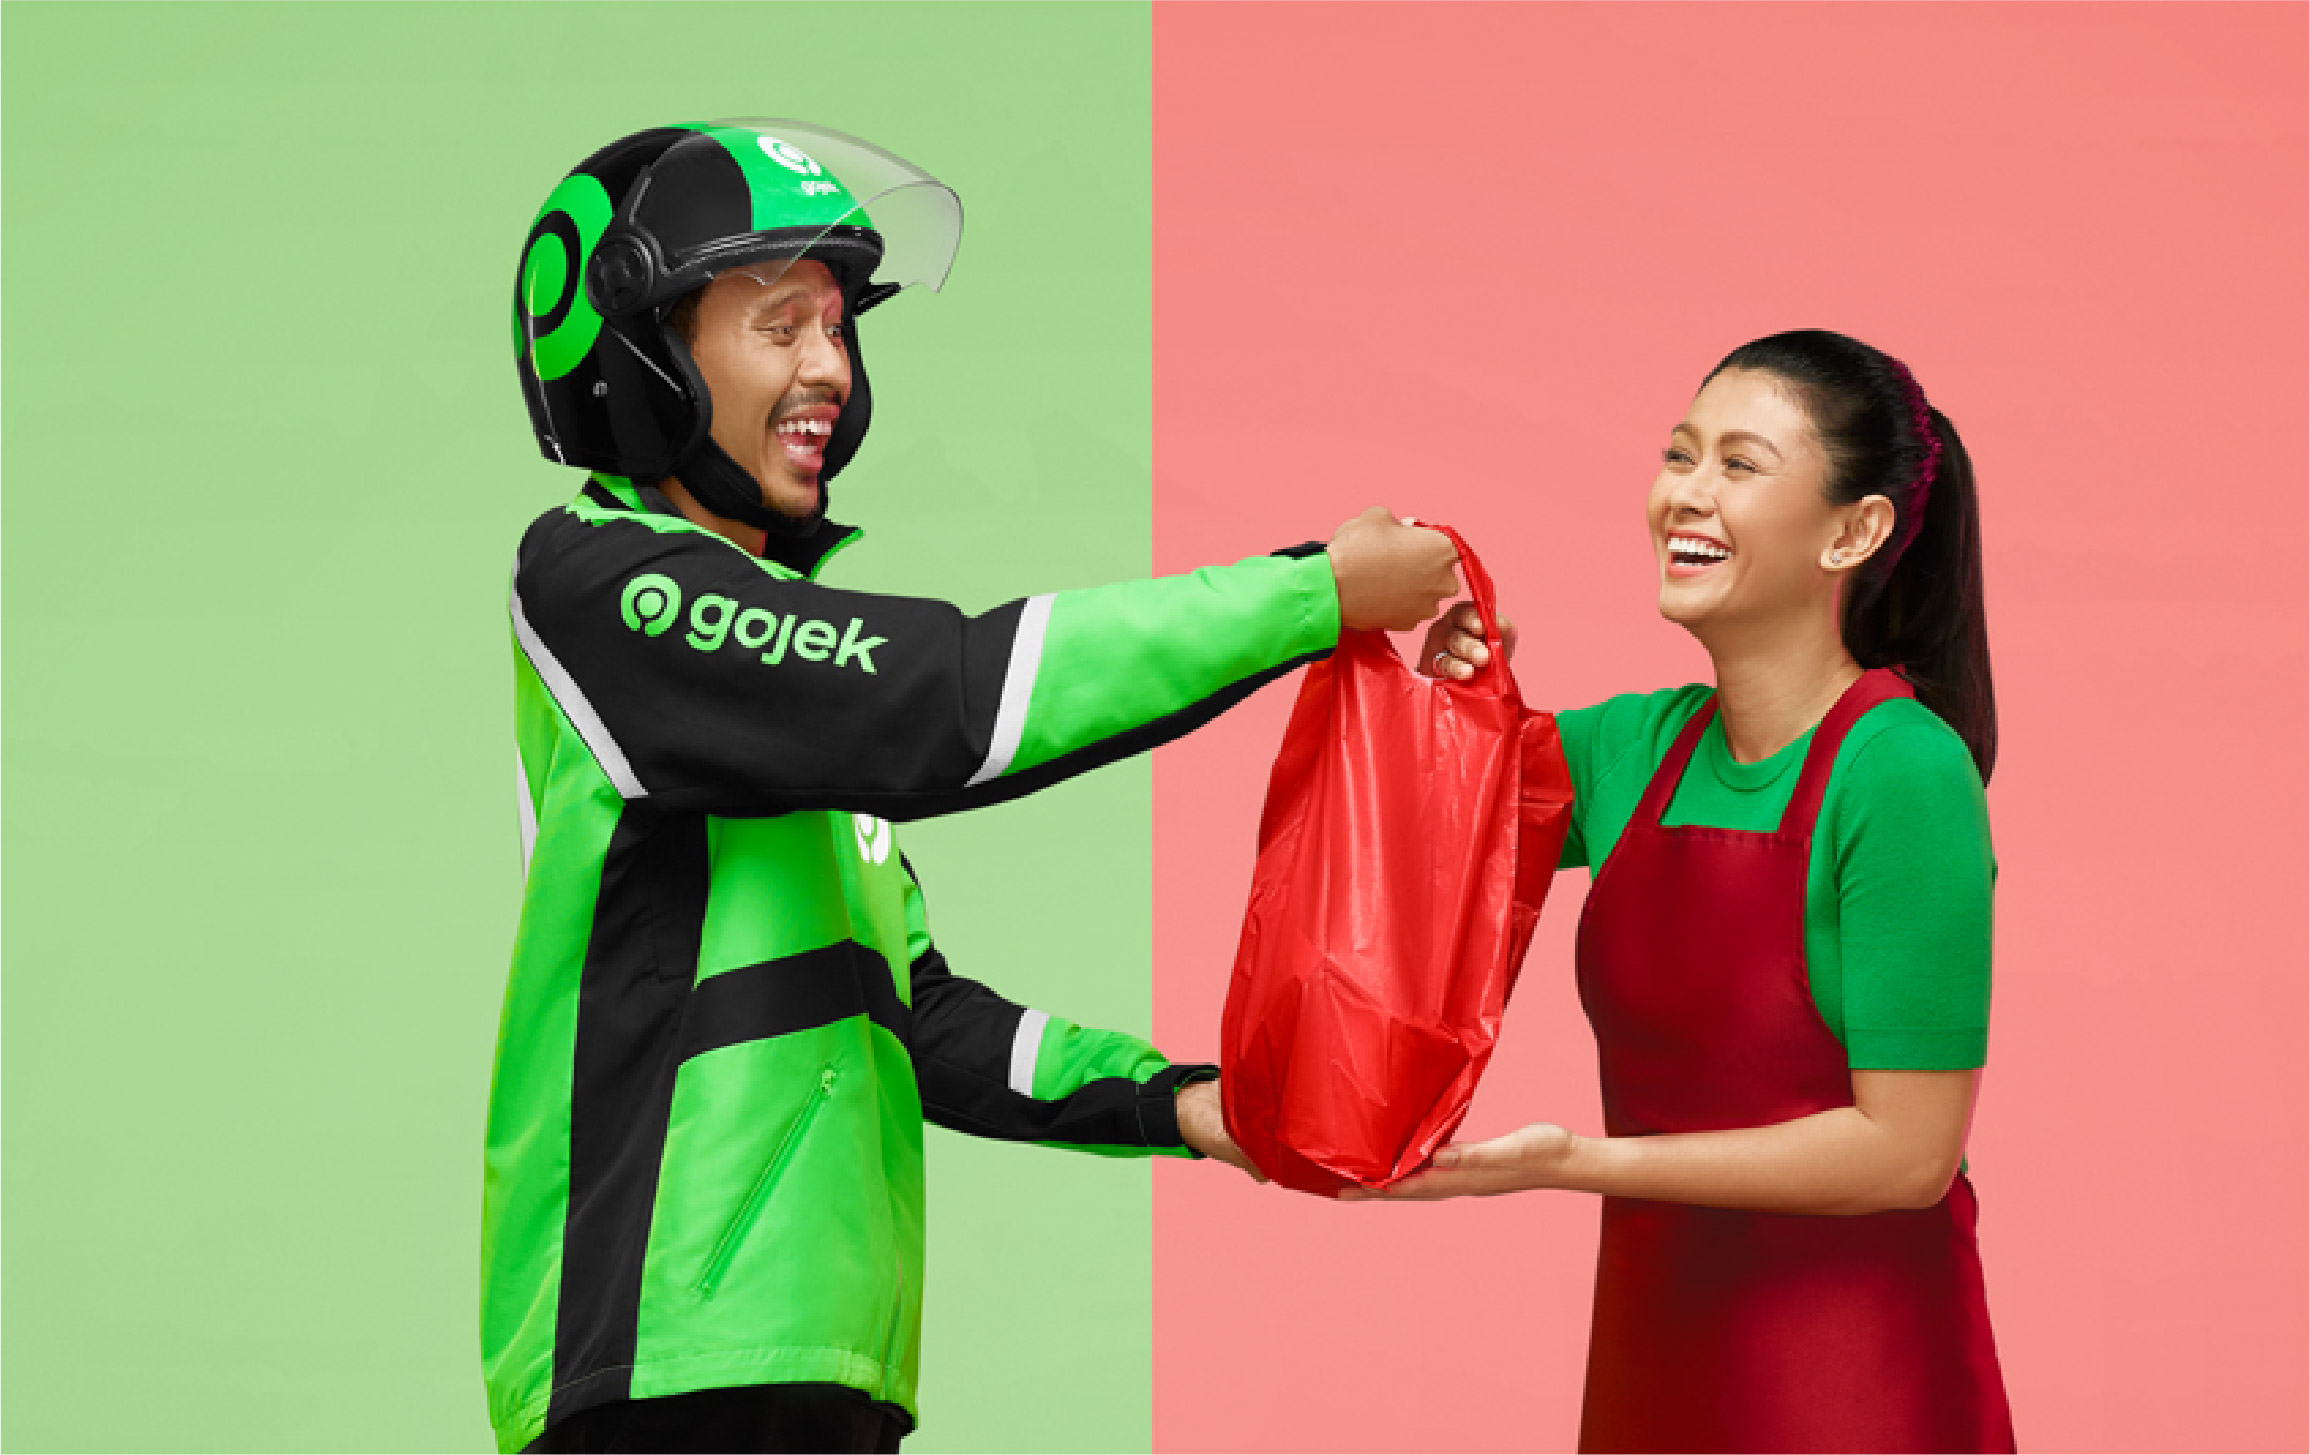 Gojek And Grab Strategies To Compete With Others During The Pandemic